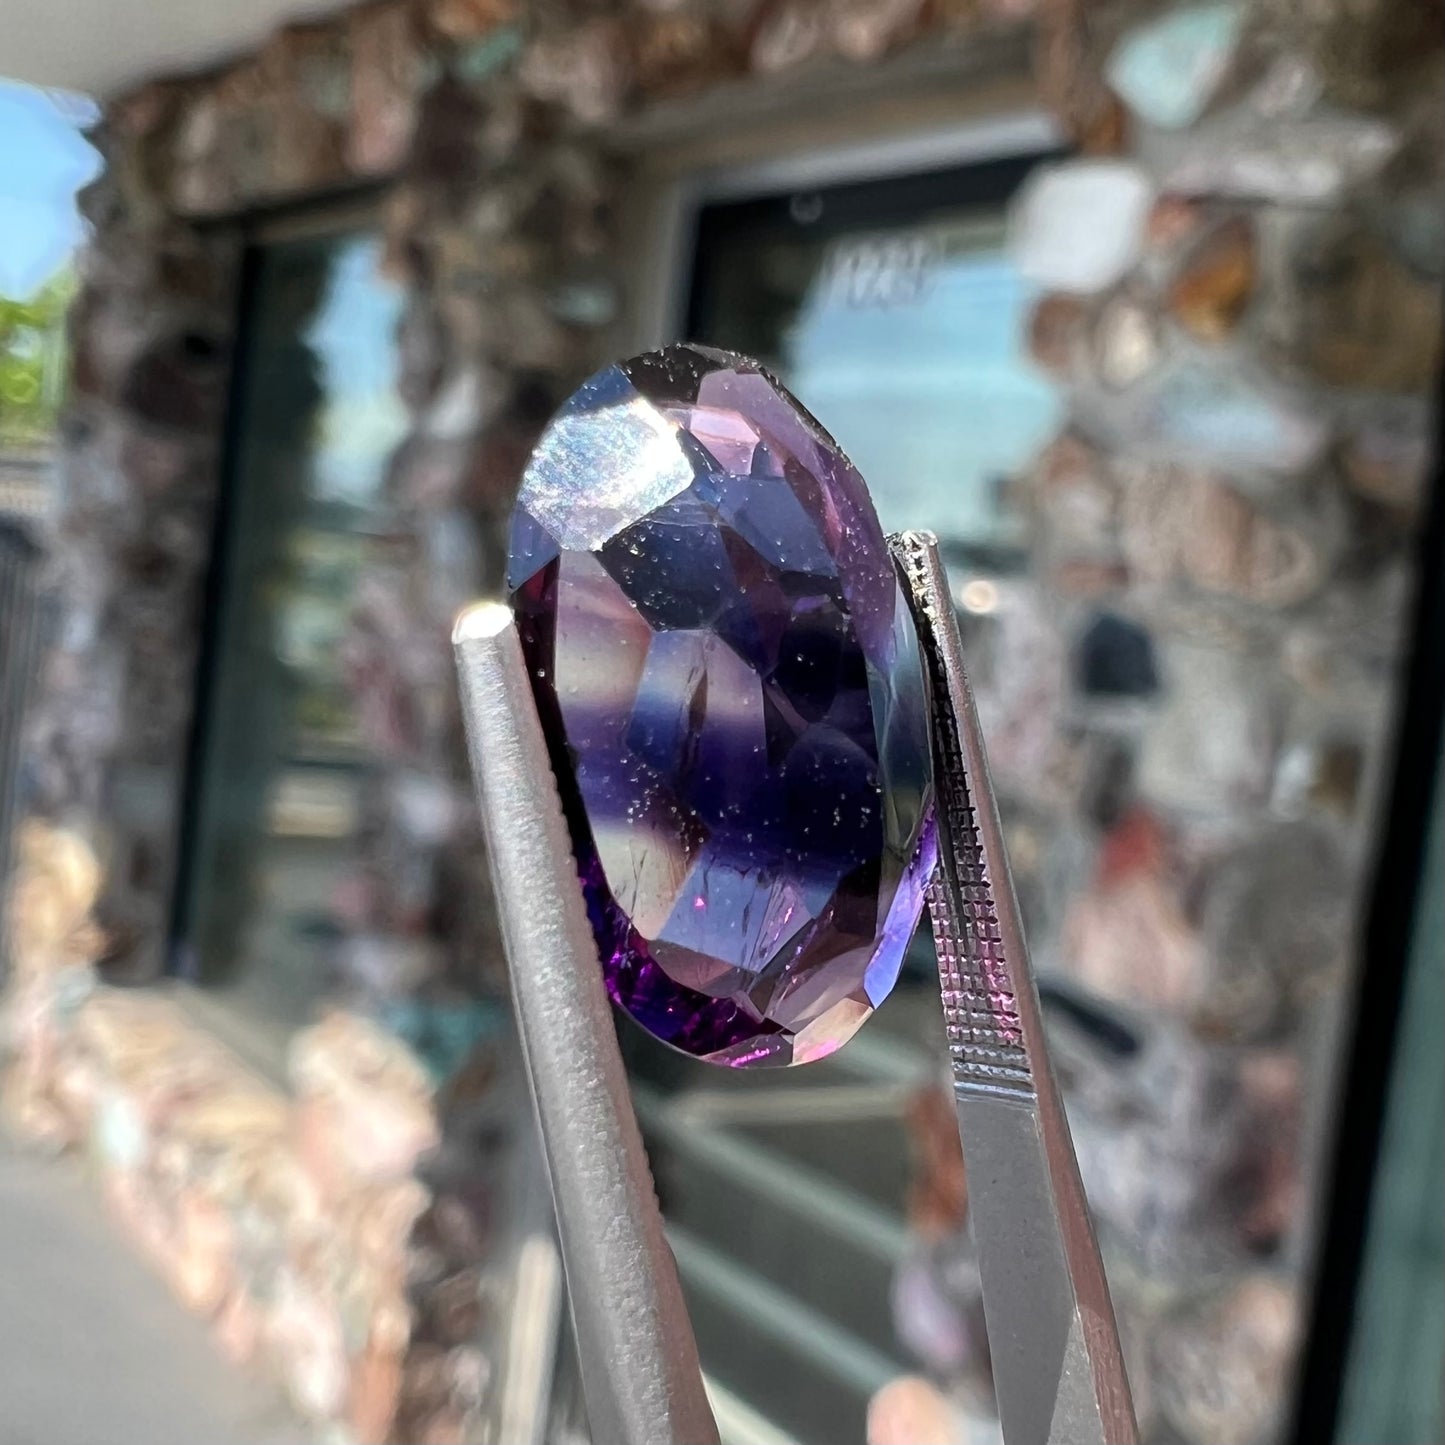 A loose, faceted oval cut Siberian amethyst gemstone.  The stone is purple color with blue and red flashes.